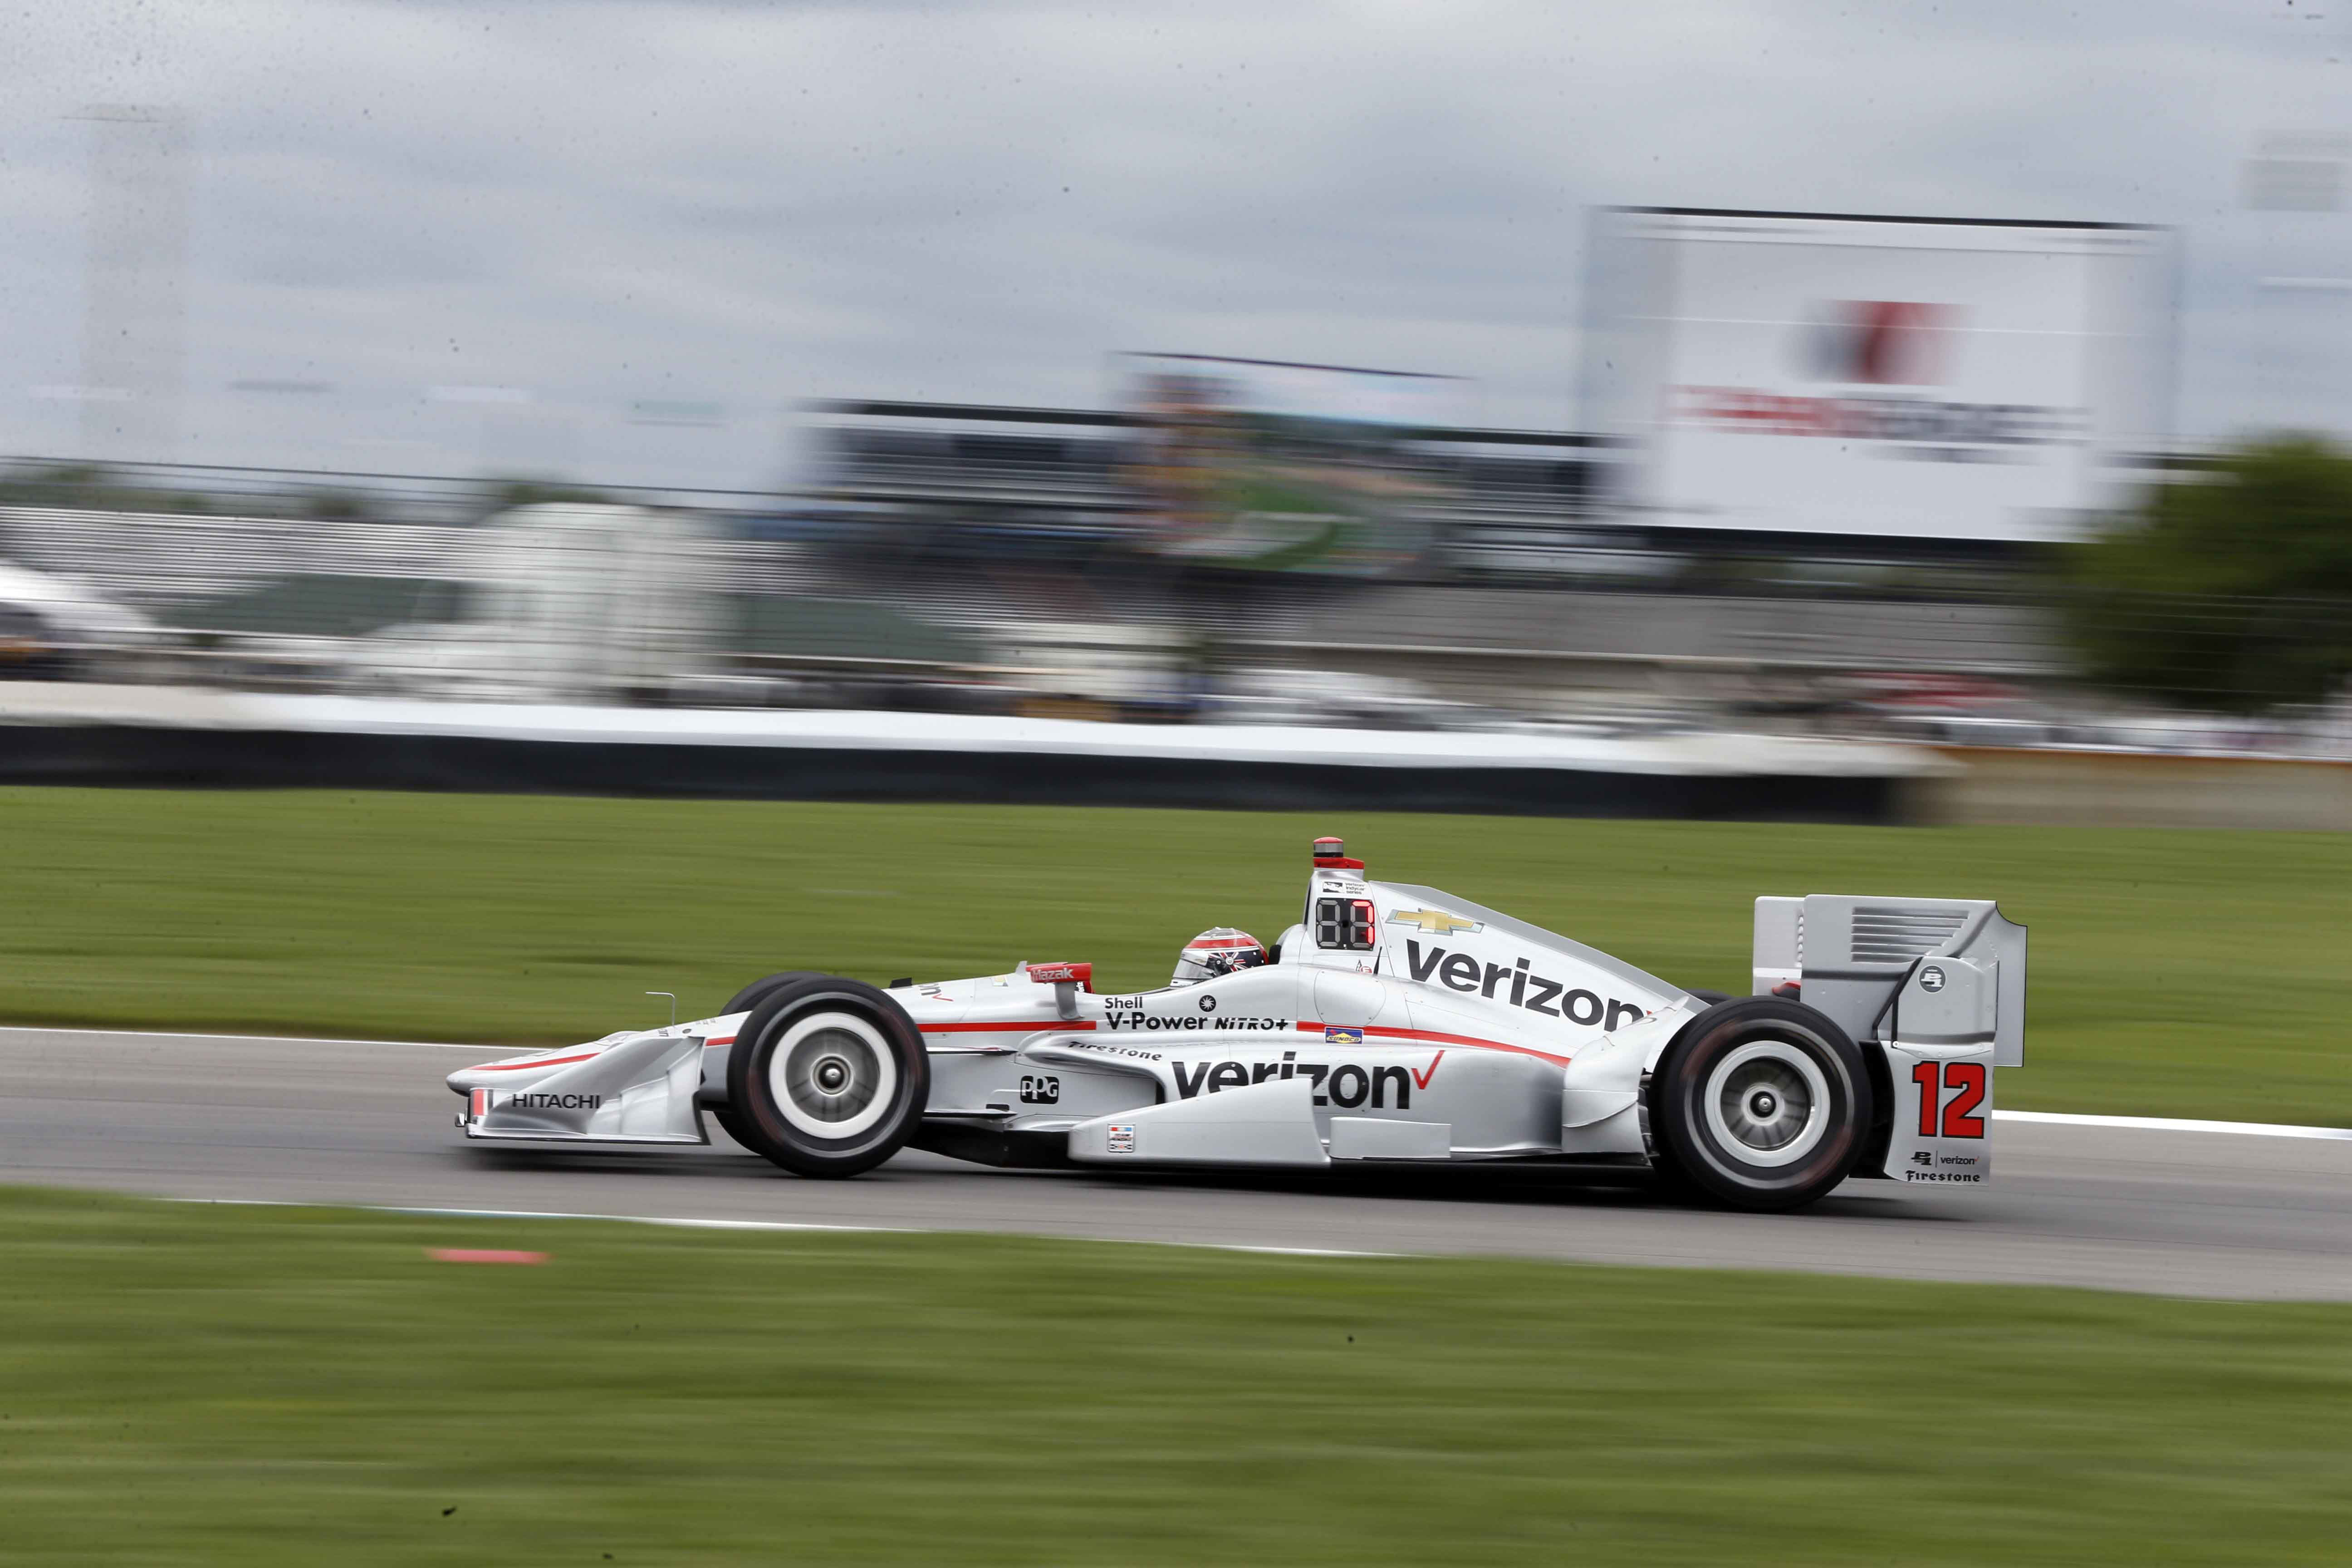 Power Takes Pole for Indianapolis Grand Prix; Penske Sweeps Top 3